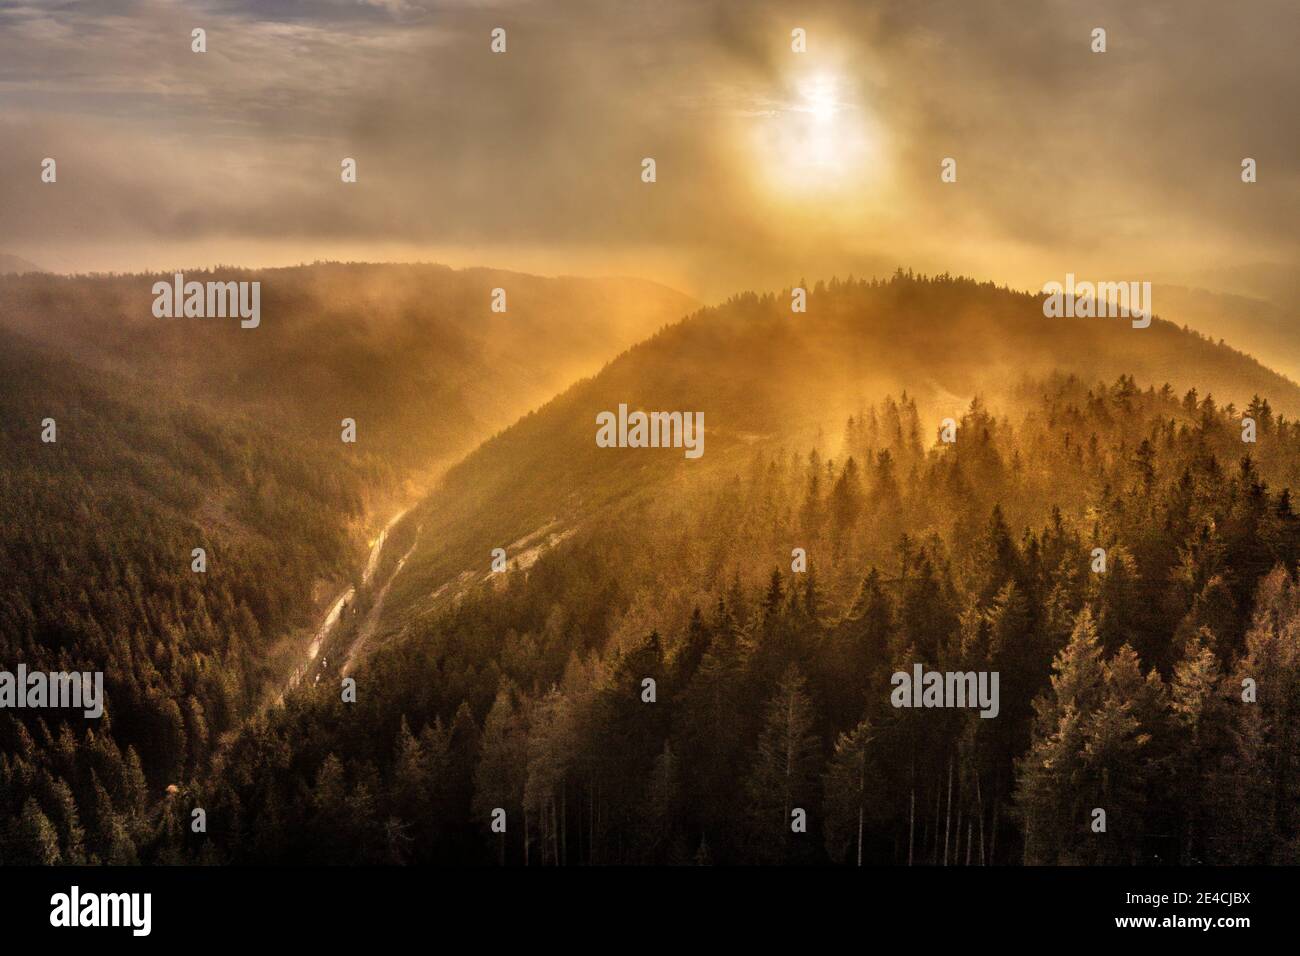 Germany, Thuringia, Großbreitenbach, Allersdorf, valley, forest, mountains, road, wisps of fog, sunrise, back light, aerial view Stock Photo